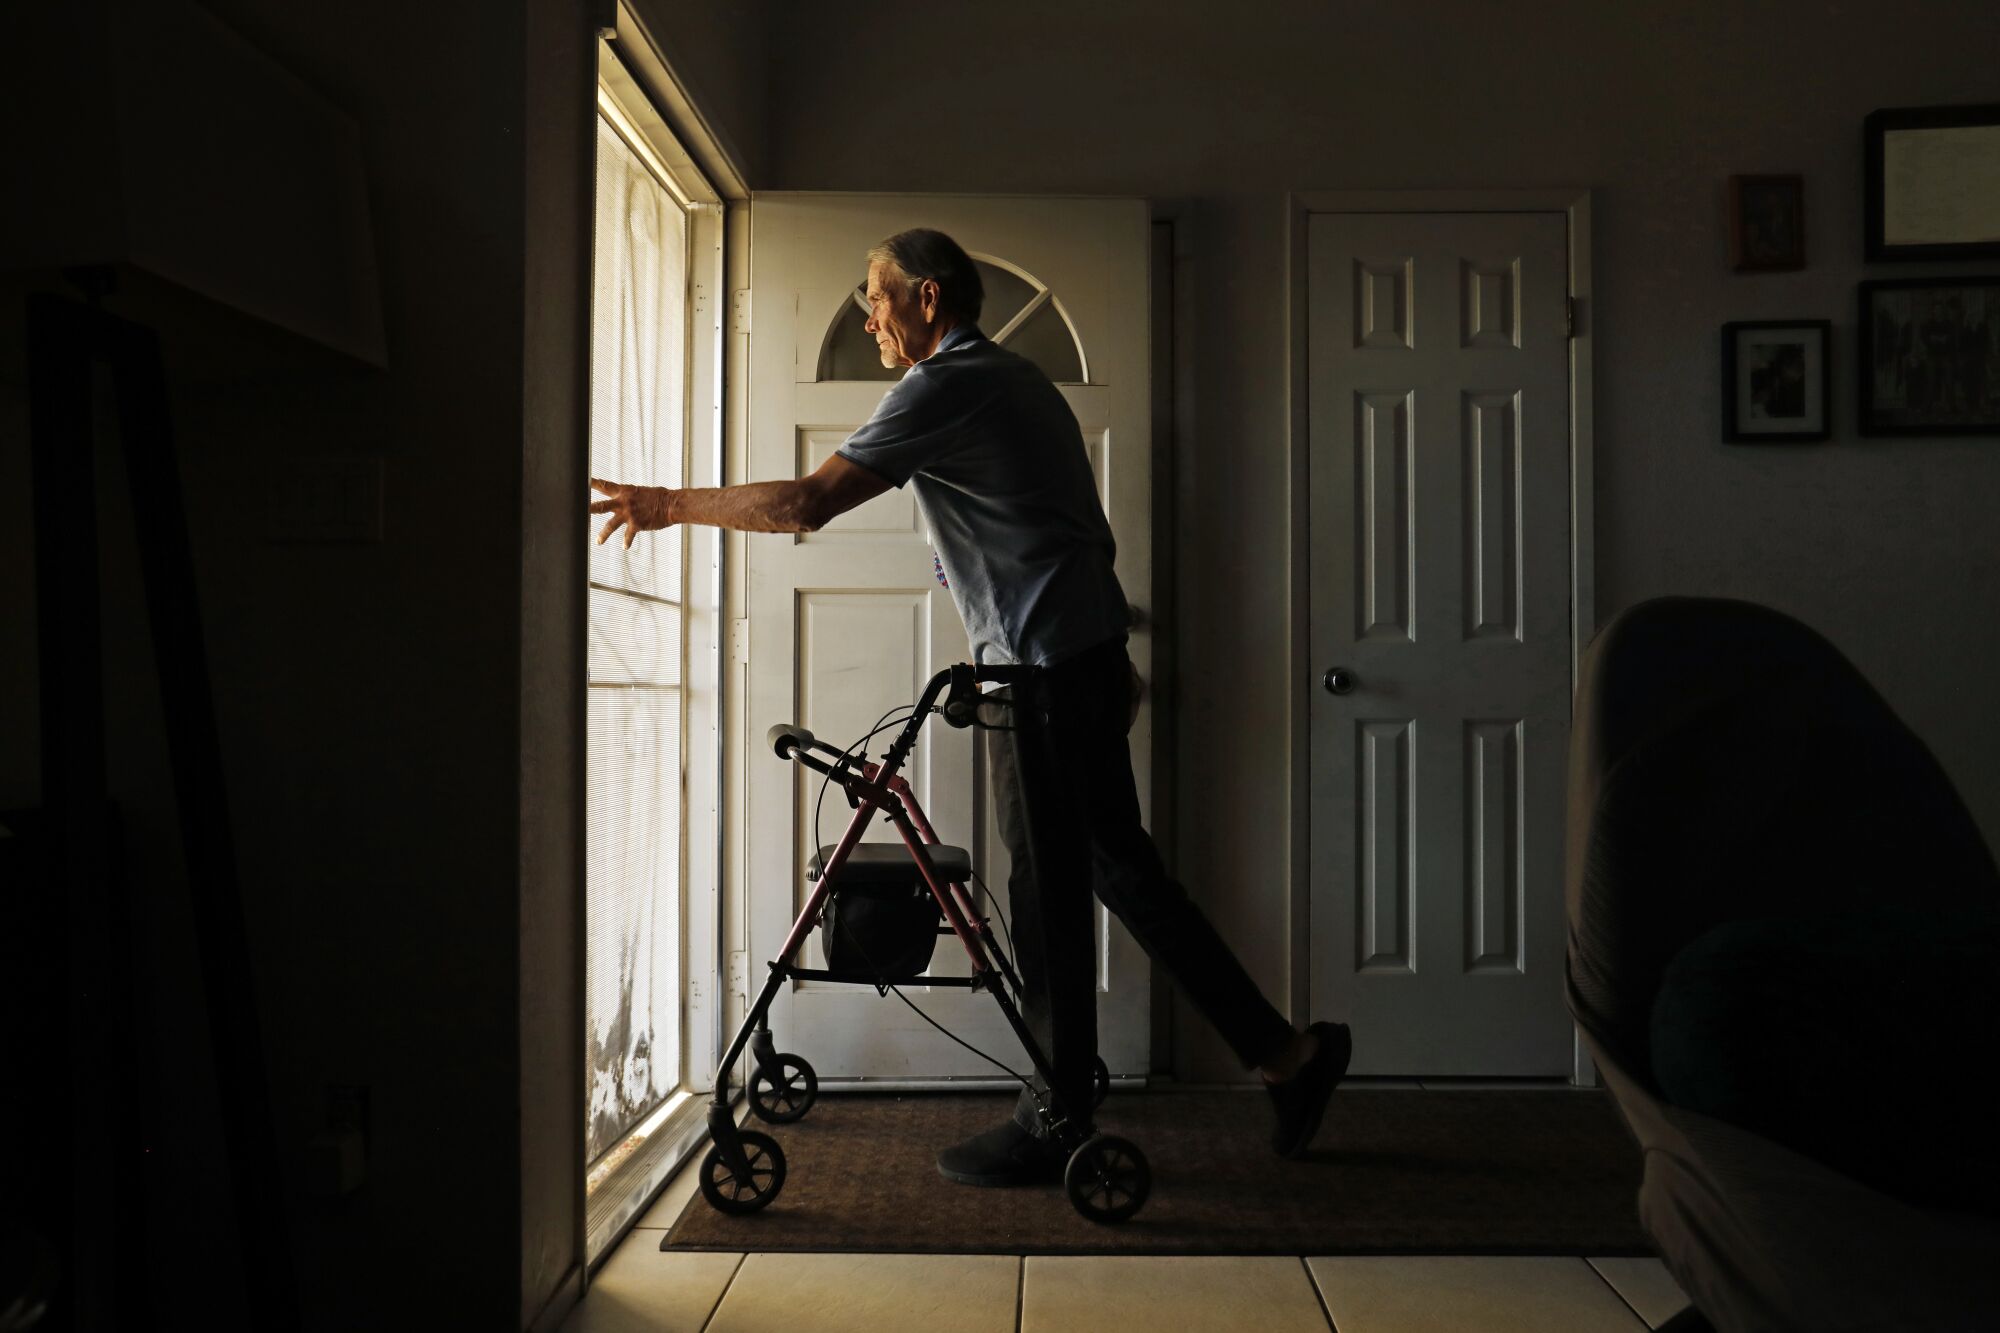 A man using a walker prepares to open a screen door as he leaves home.